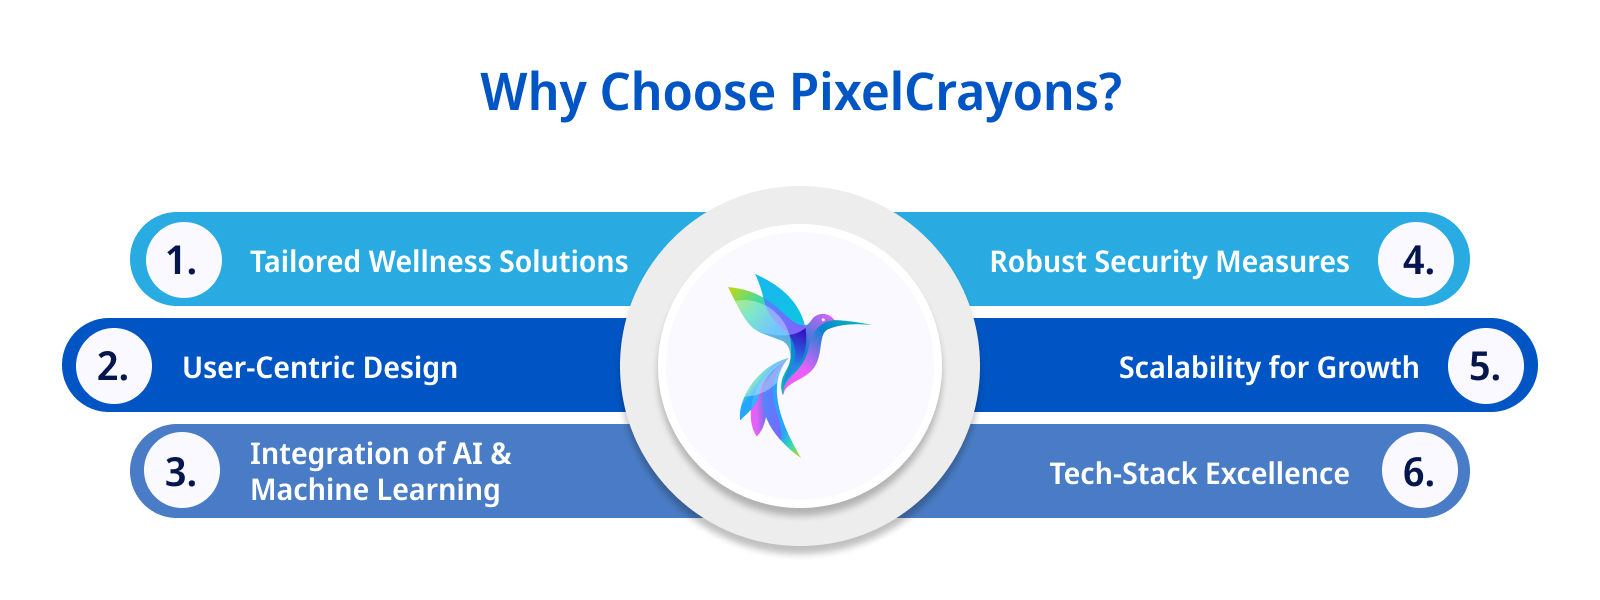 Why Choose PixelCrayons